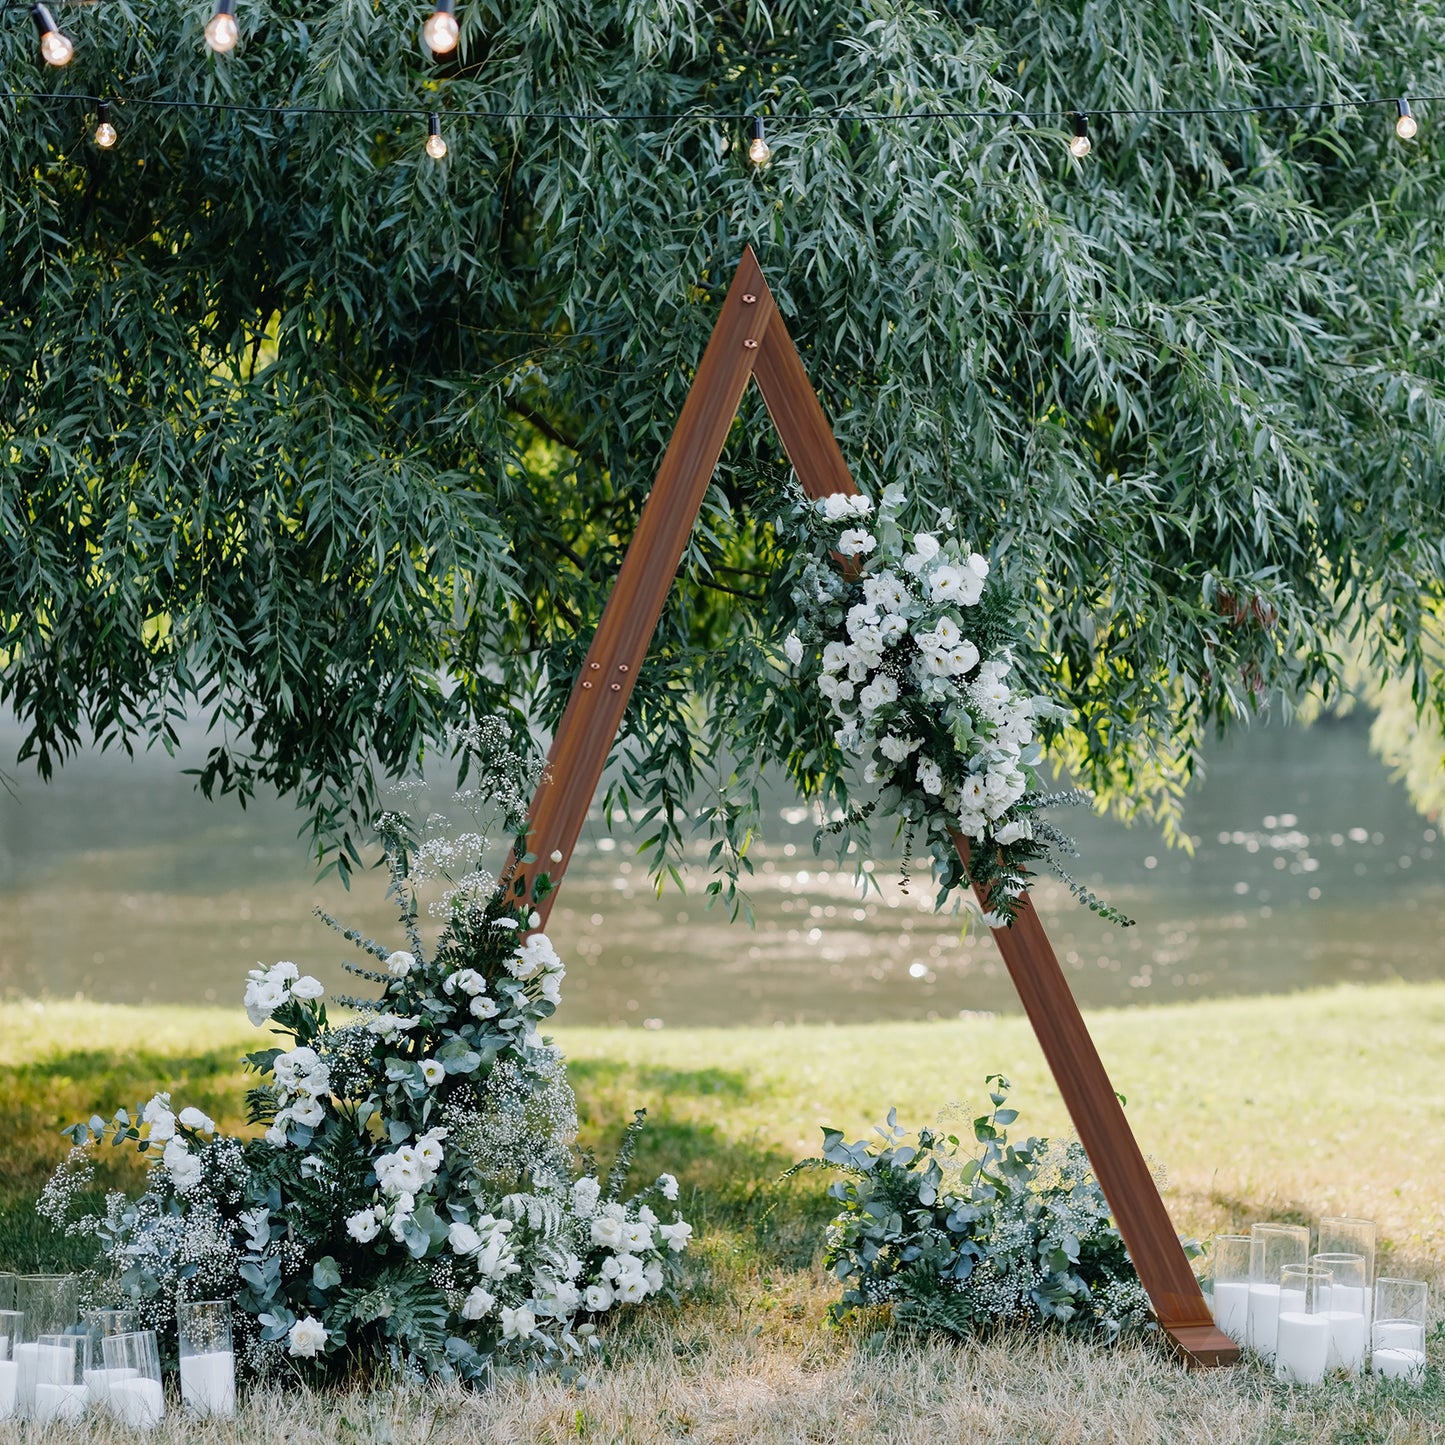 Wooden Wedding Arch Stand Triangle Base